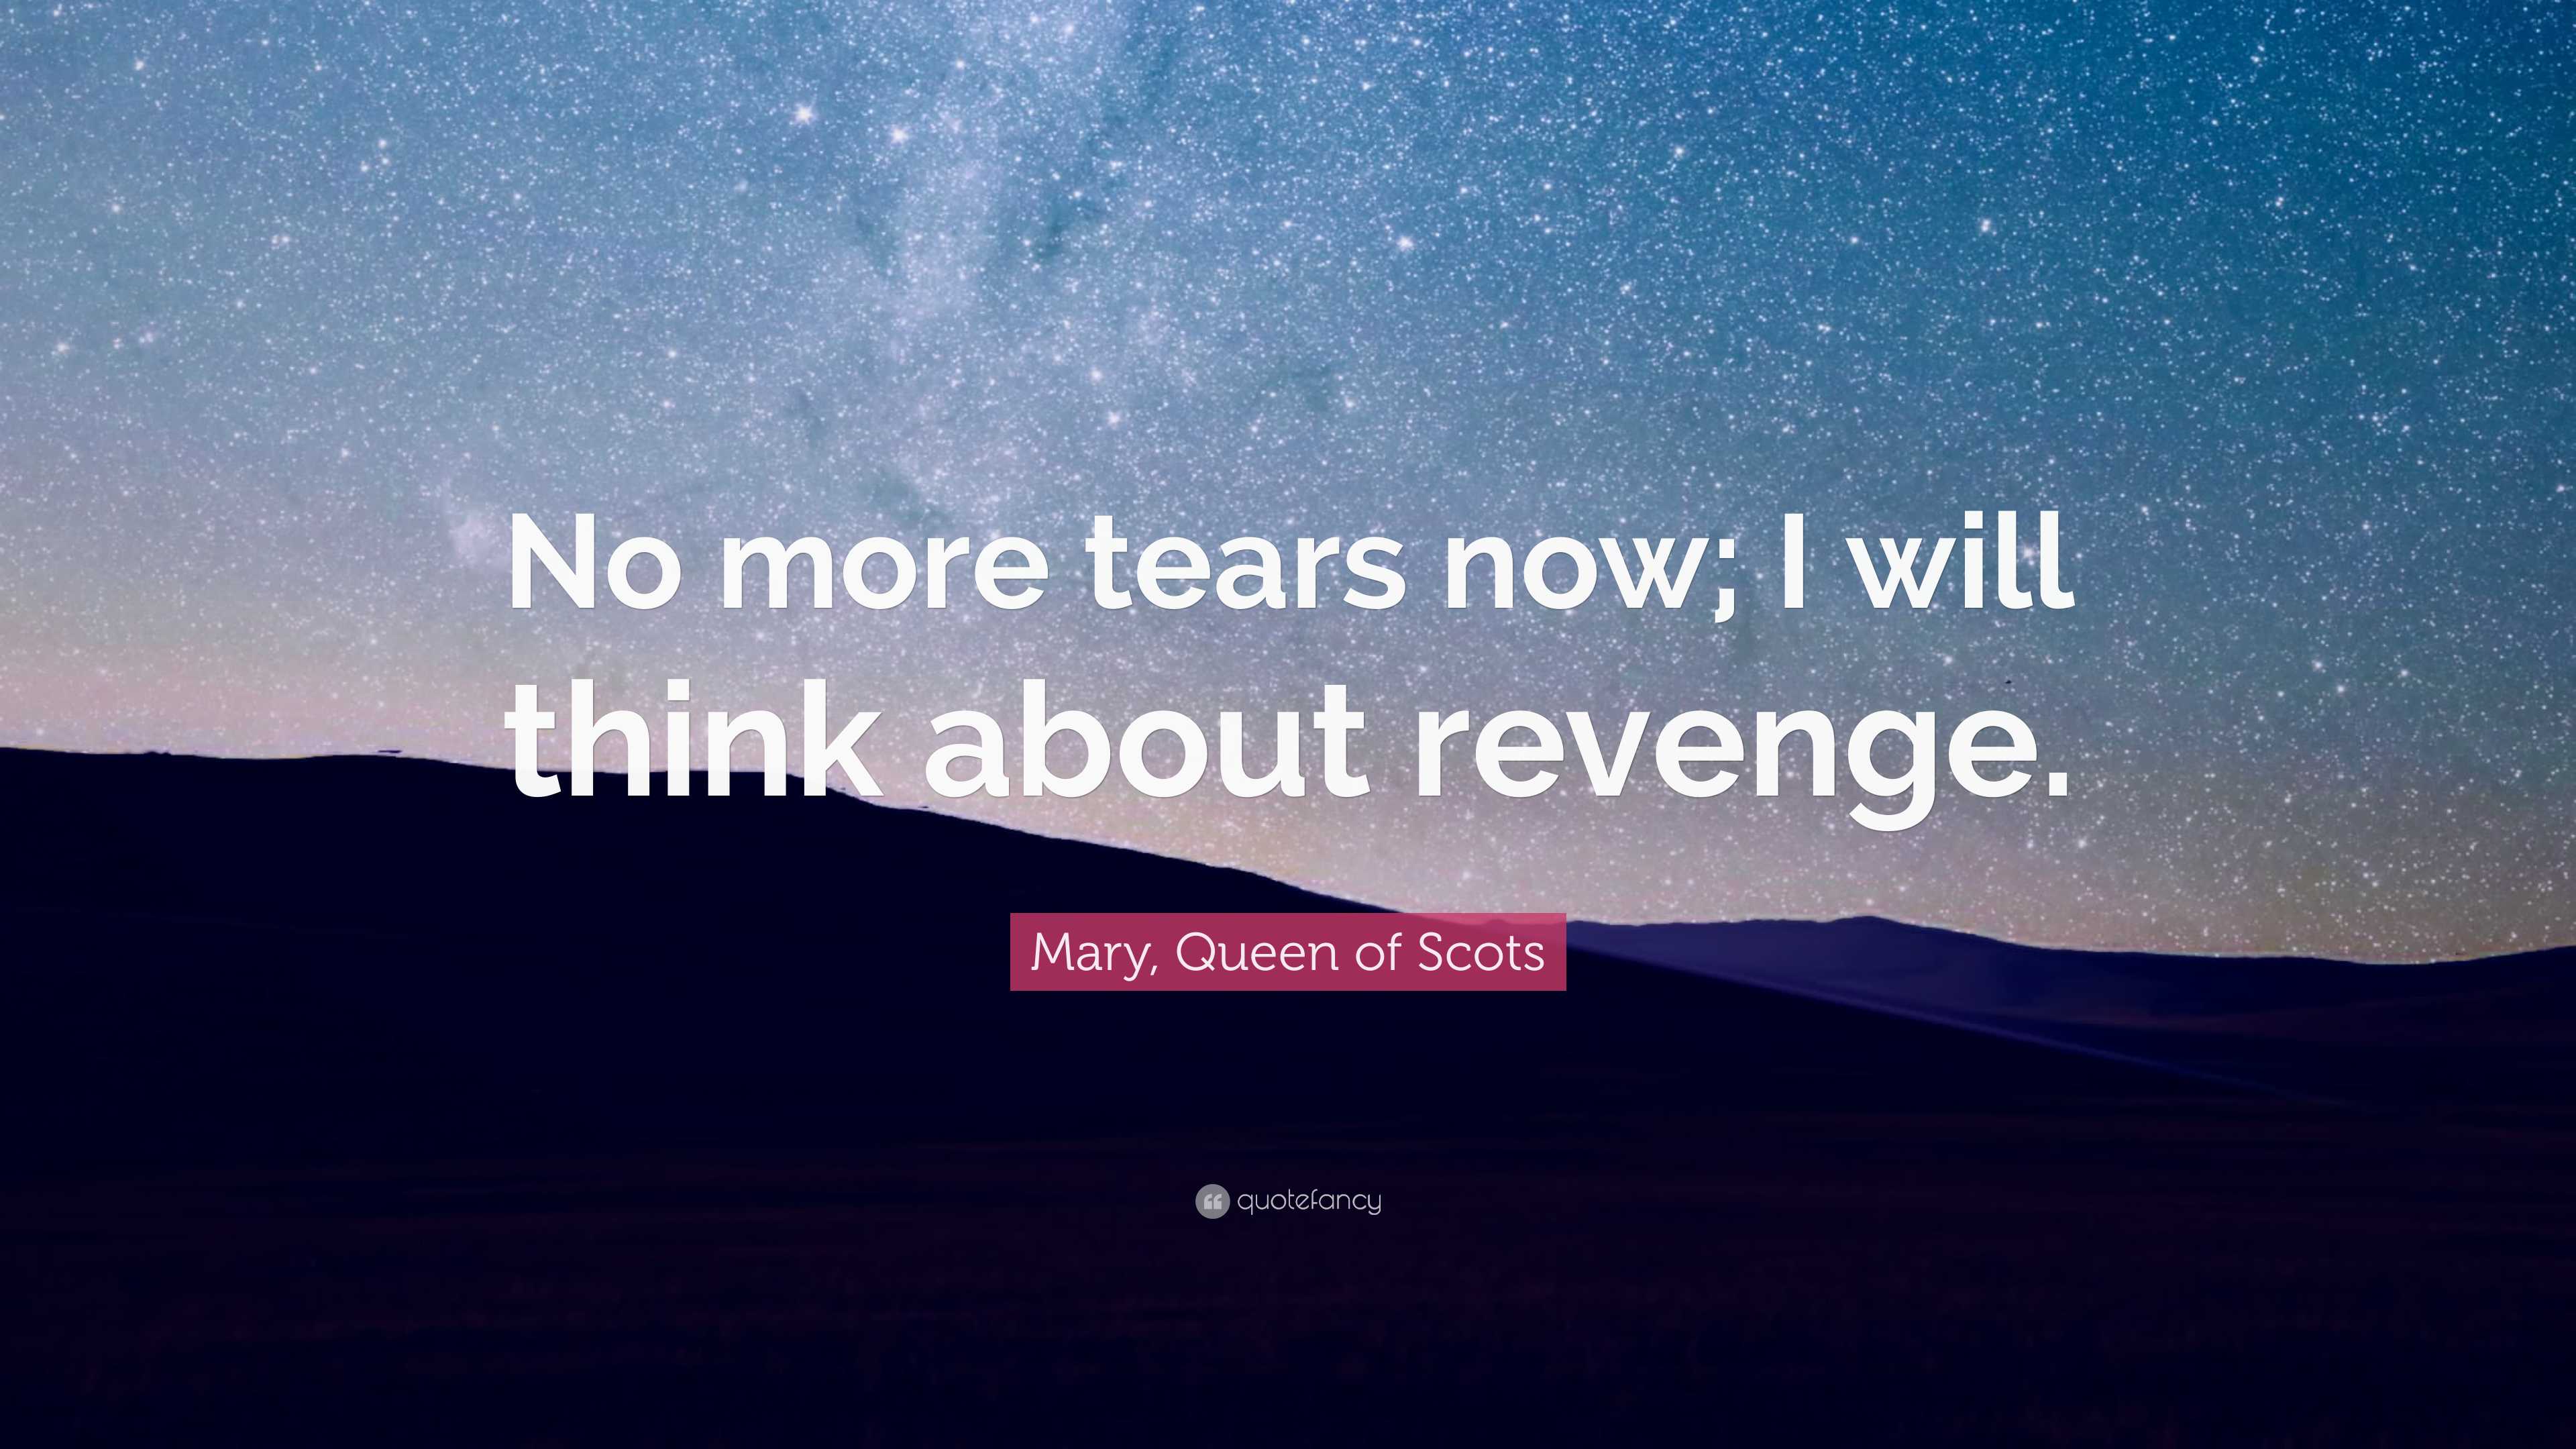 Mary, Queen of Scots I tears “No think now; Quote: about more will